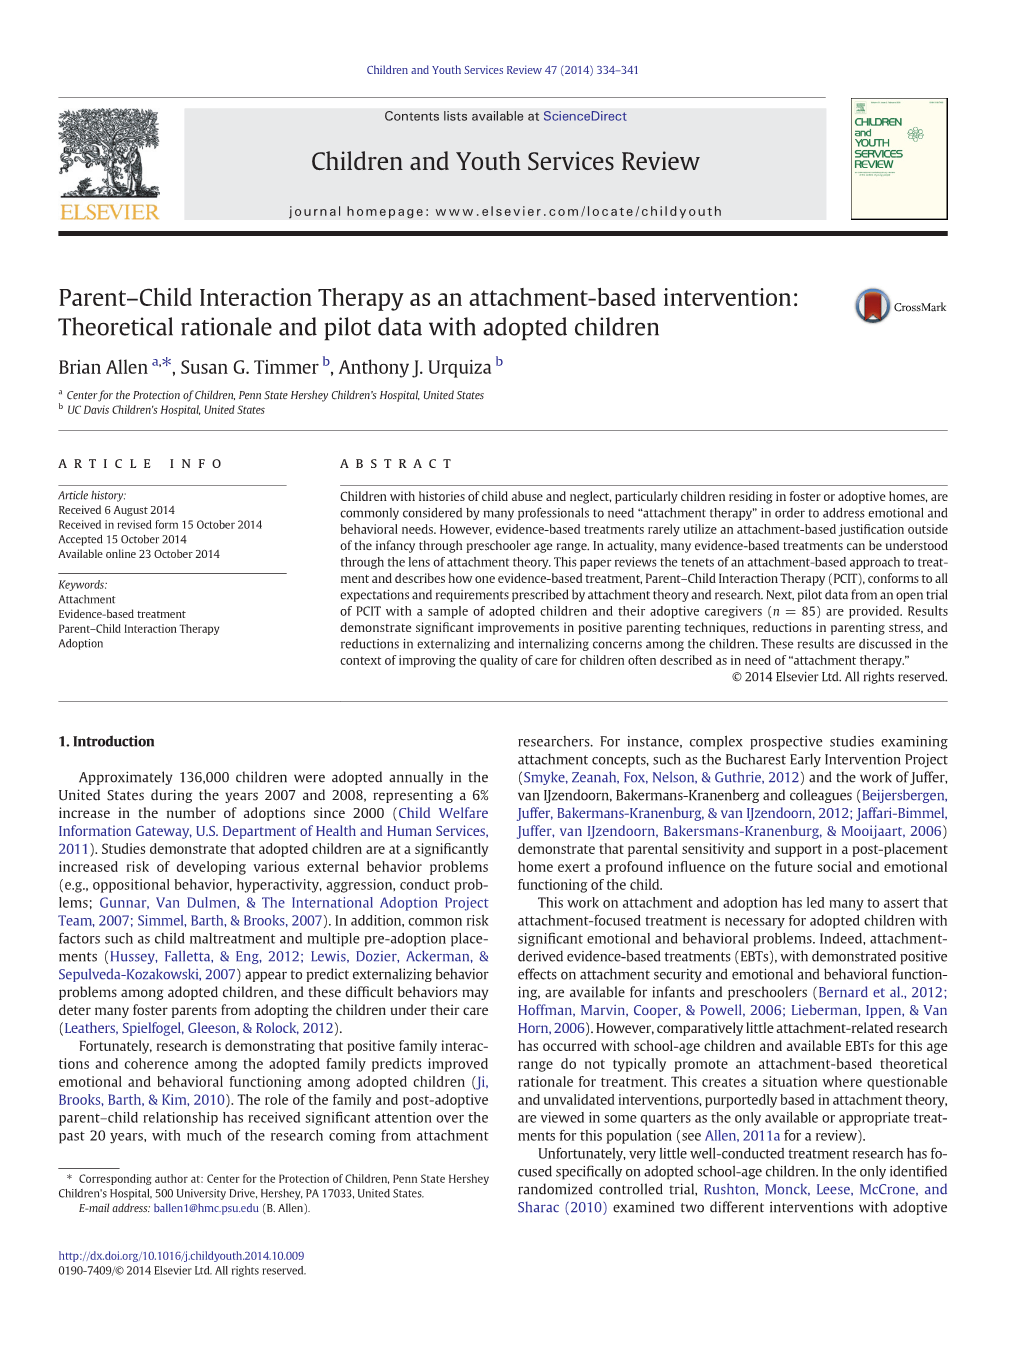 Parent–Child Interaction Therapy As an Attachment-Based Intervention: Theoretical Rationale and Pilot Data with Adopted Children